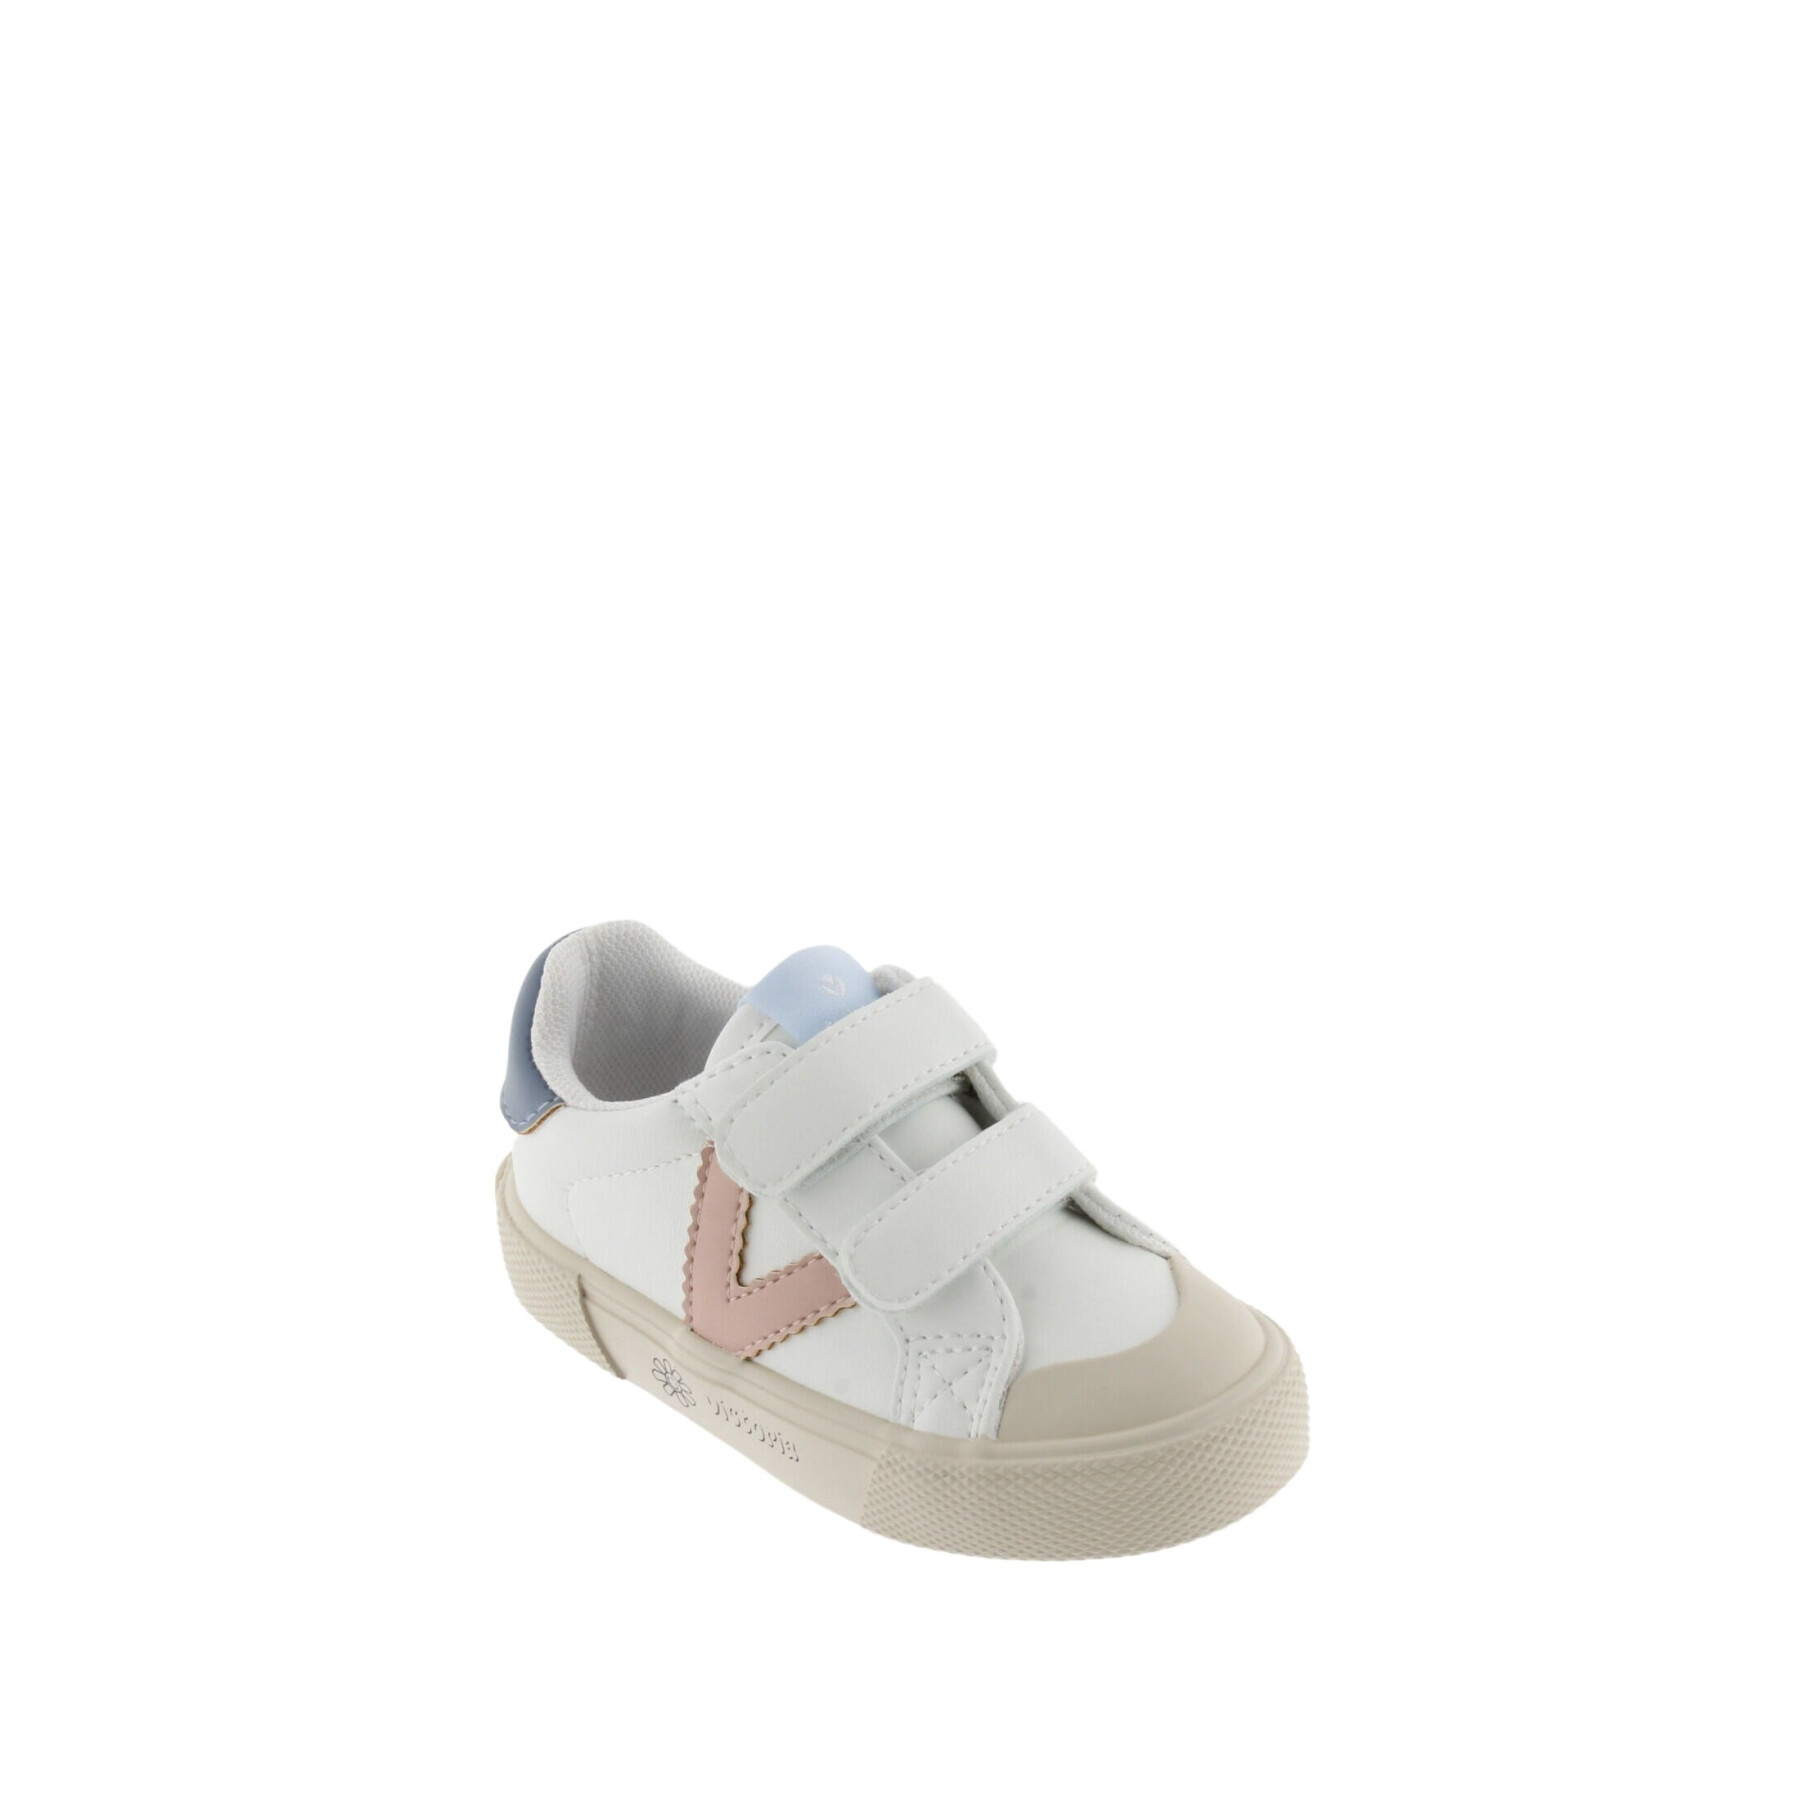 Scratcht leather effect baby sneakers Victoria Tribu